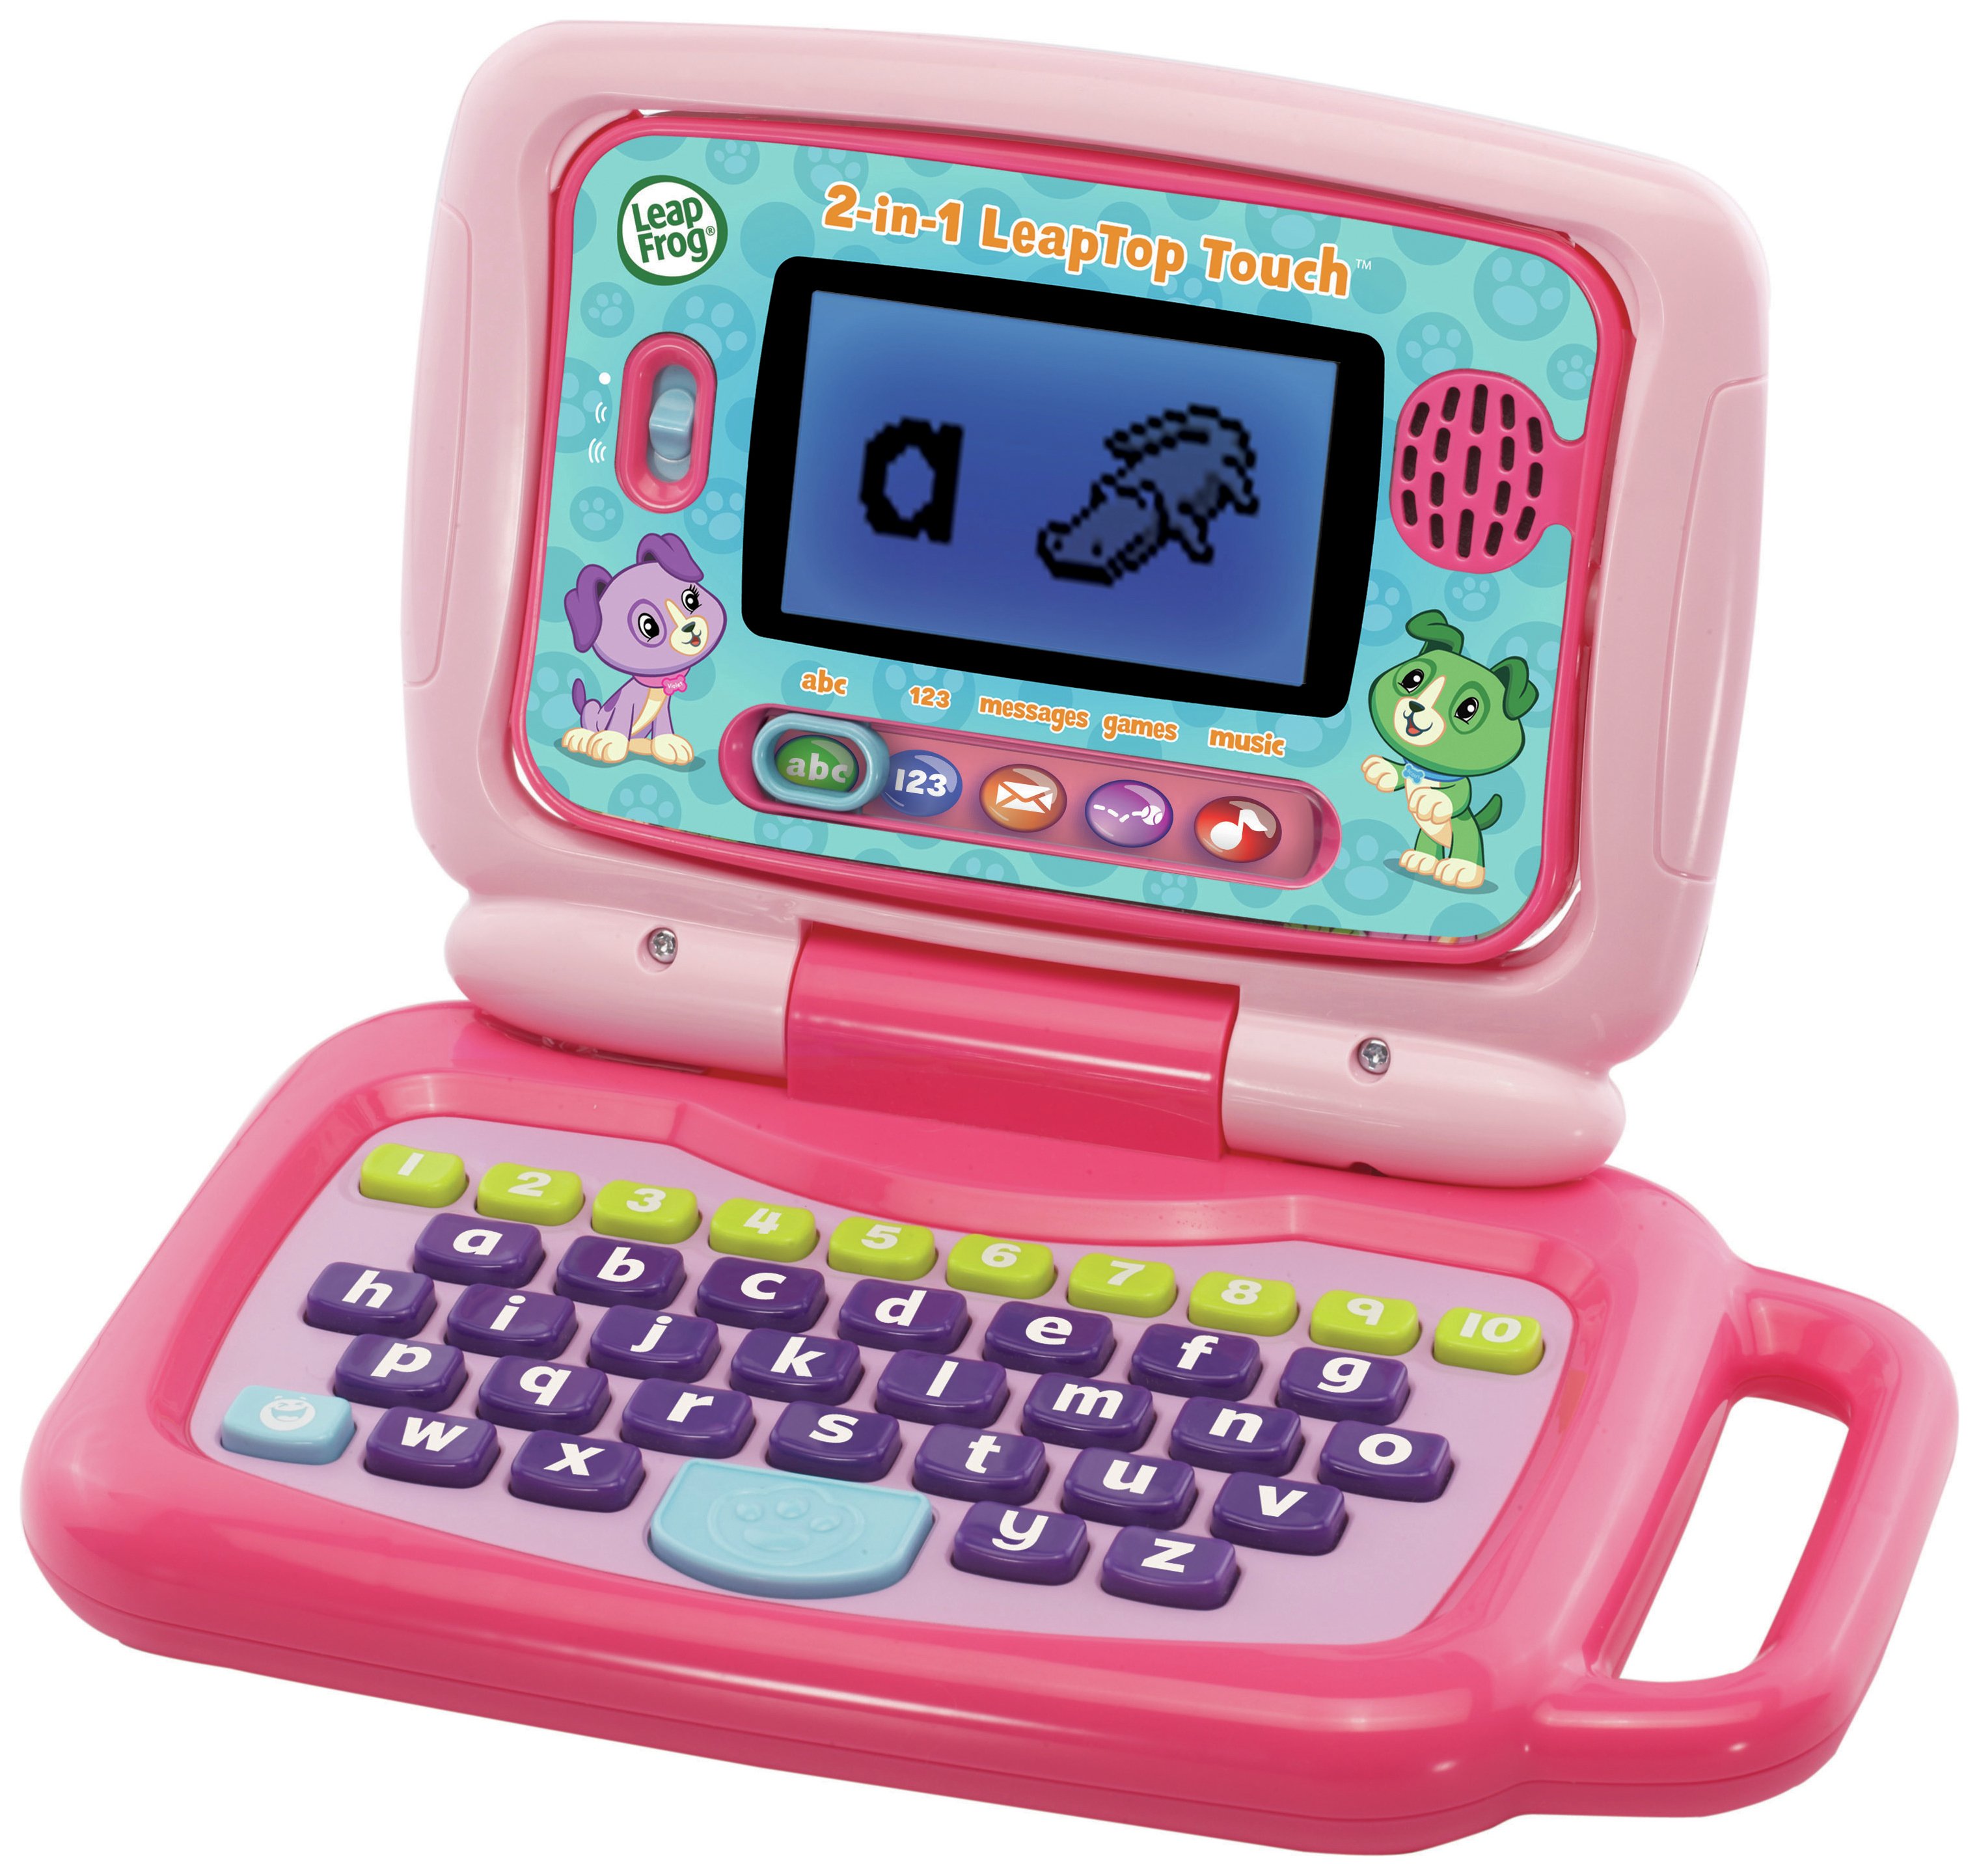 LeapFrog 2 in 1 Laptop Touch - Pink